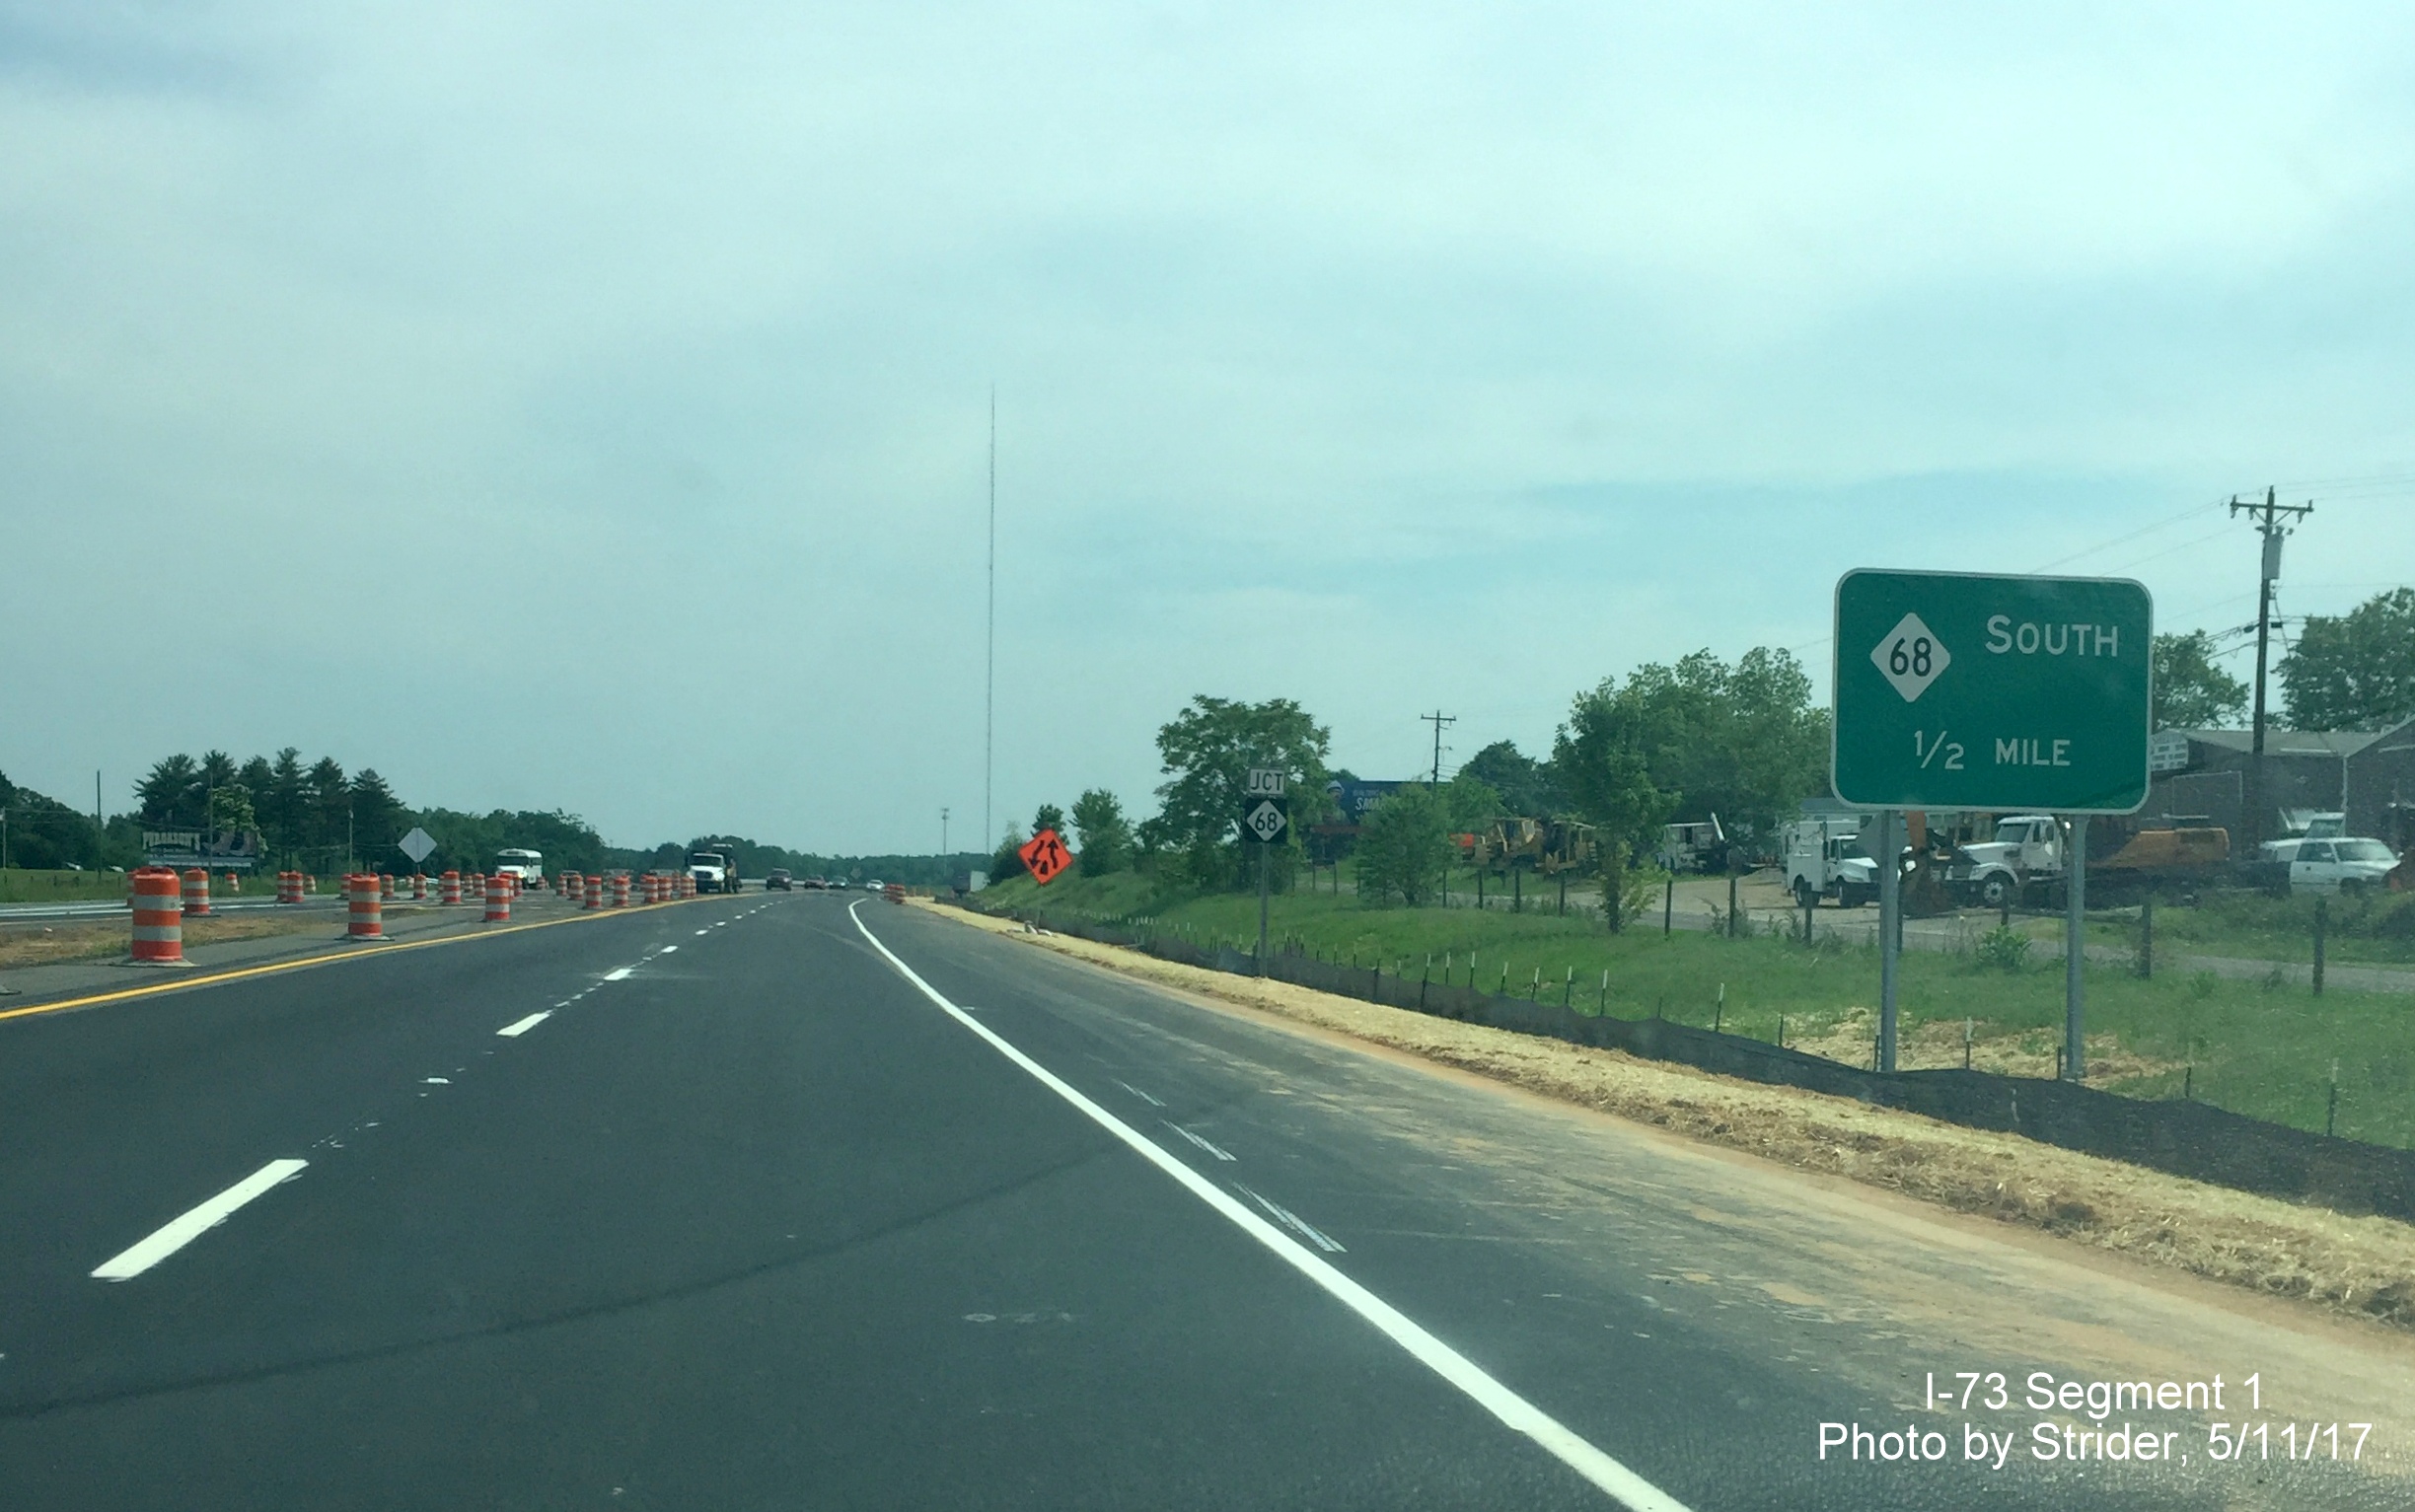 Image taken of newly placed 1/2 mile exit sign for new NC 68 South exit from US 220 South in Rockingham County, by Strider